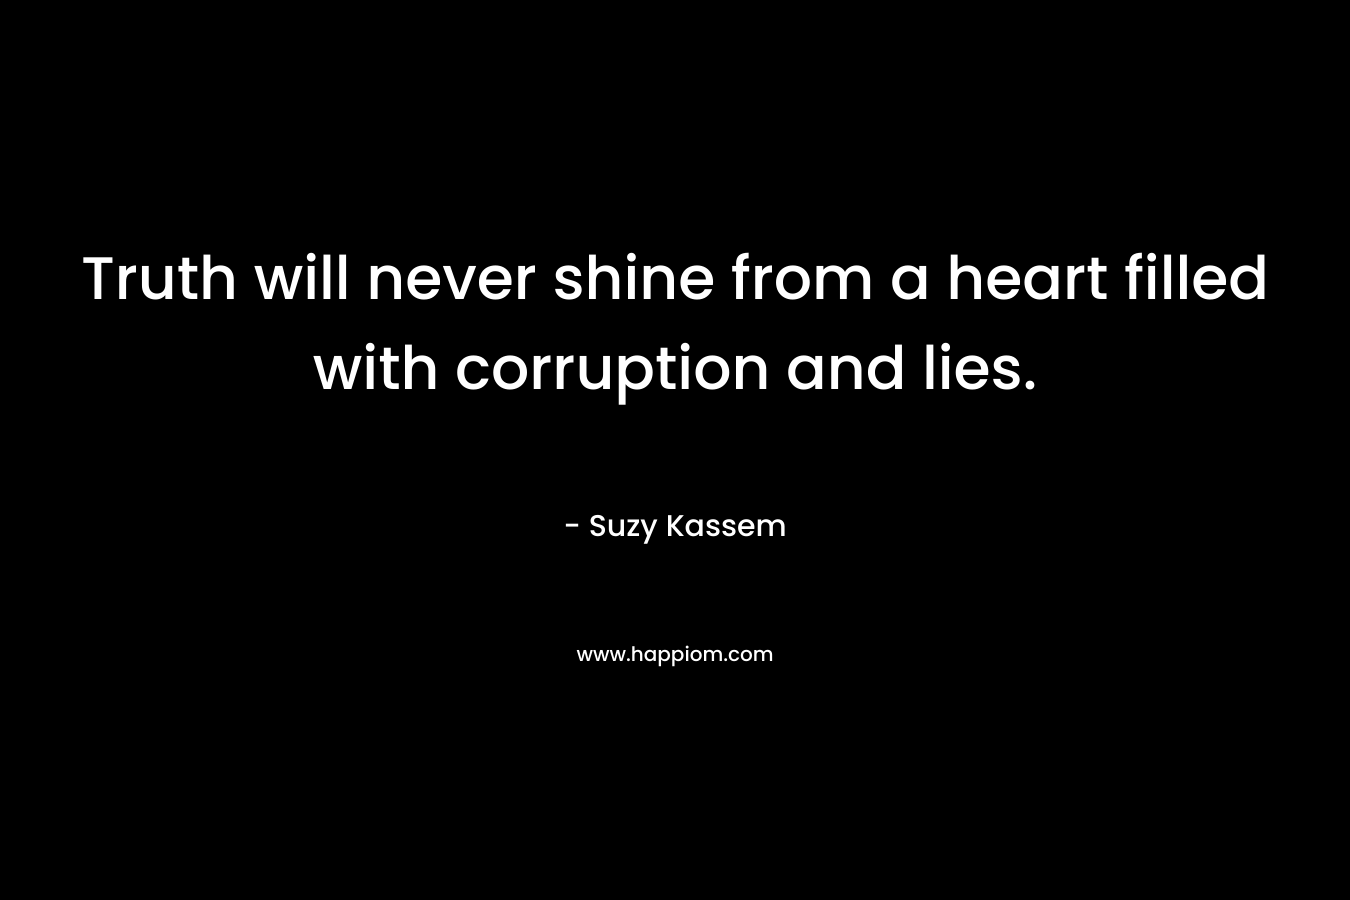 Truth will never shine from a heart filled with corruption and lies.